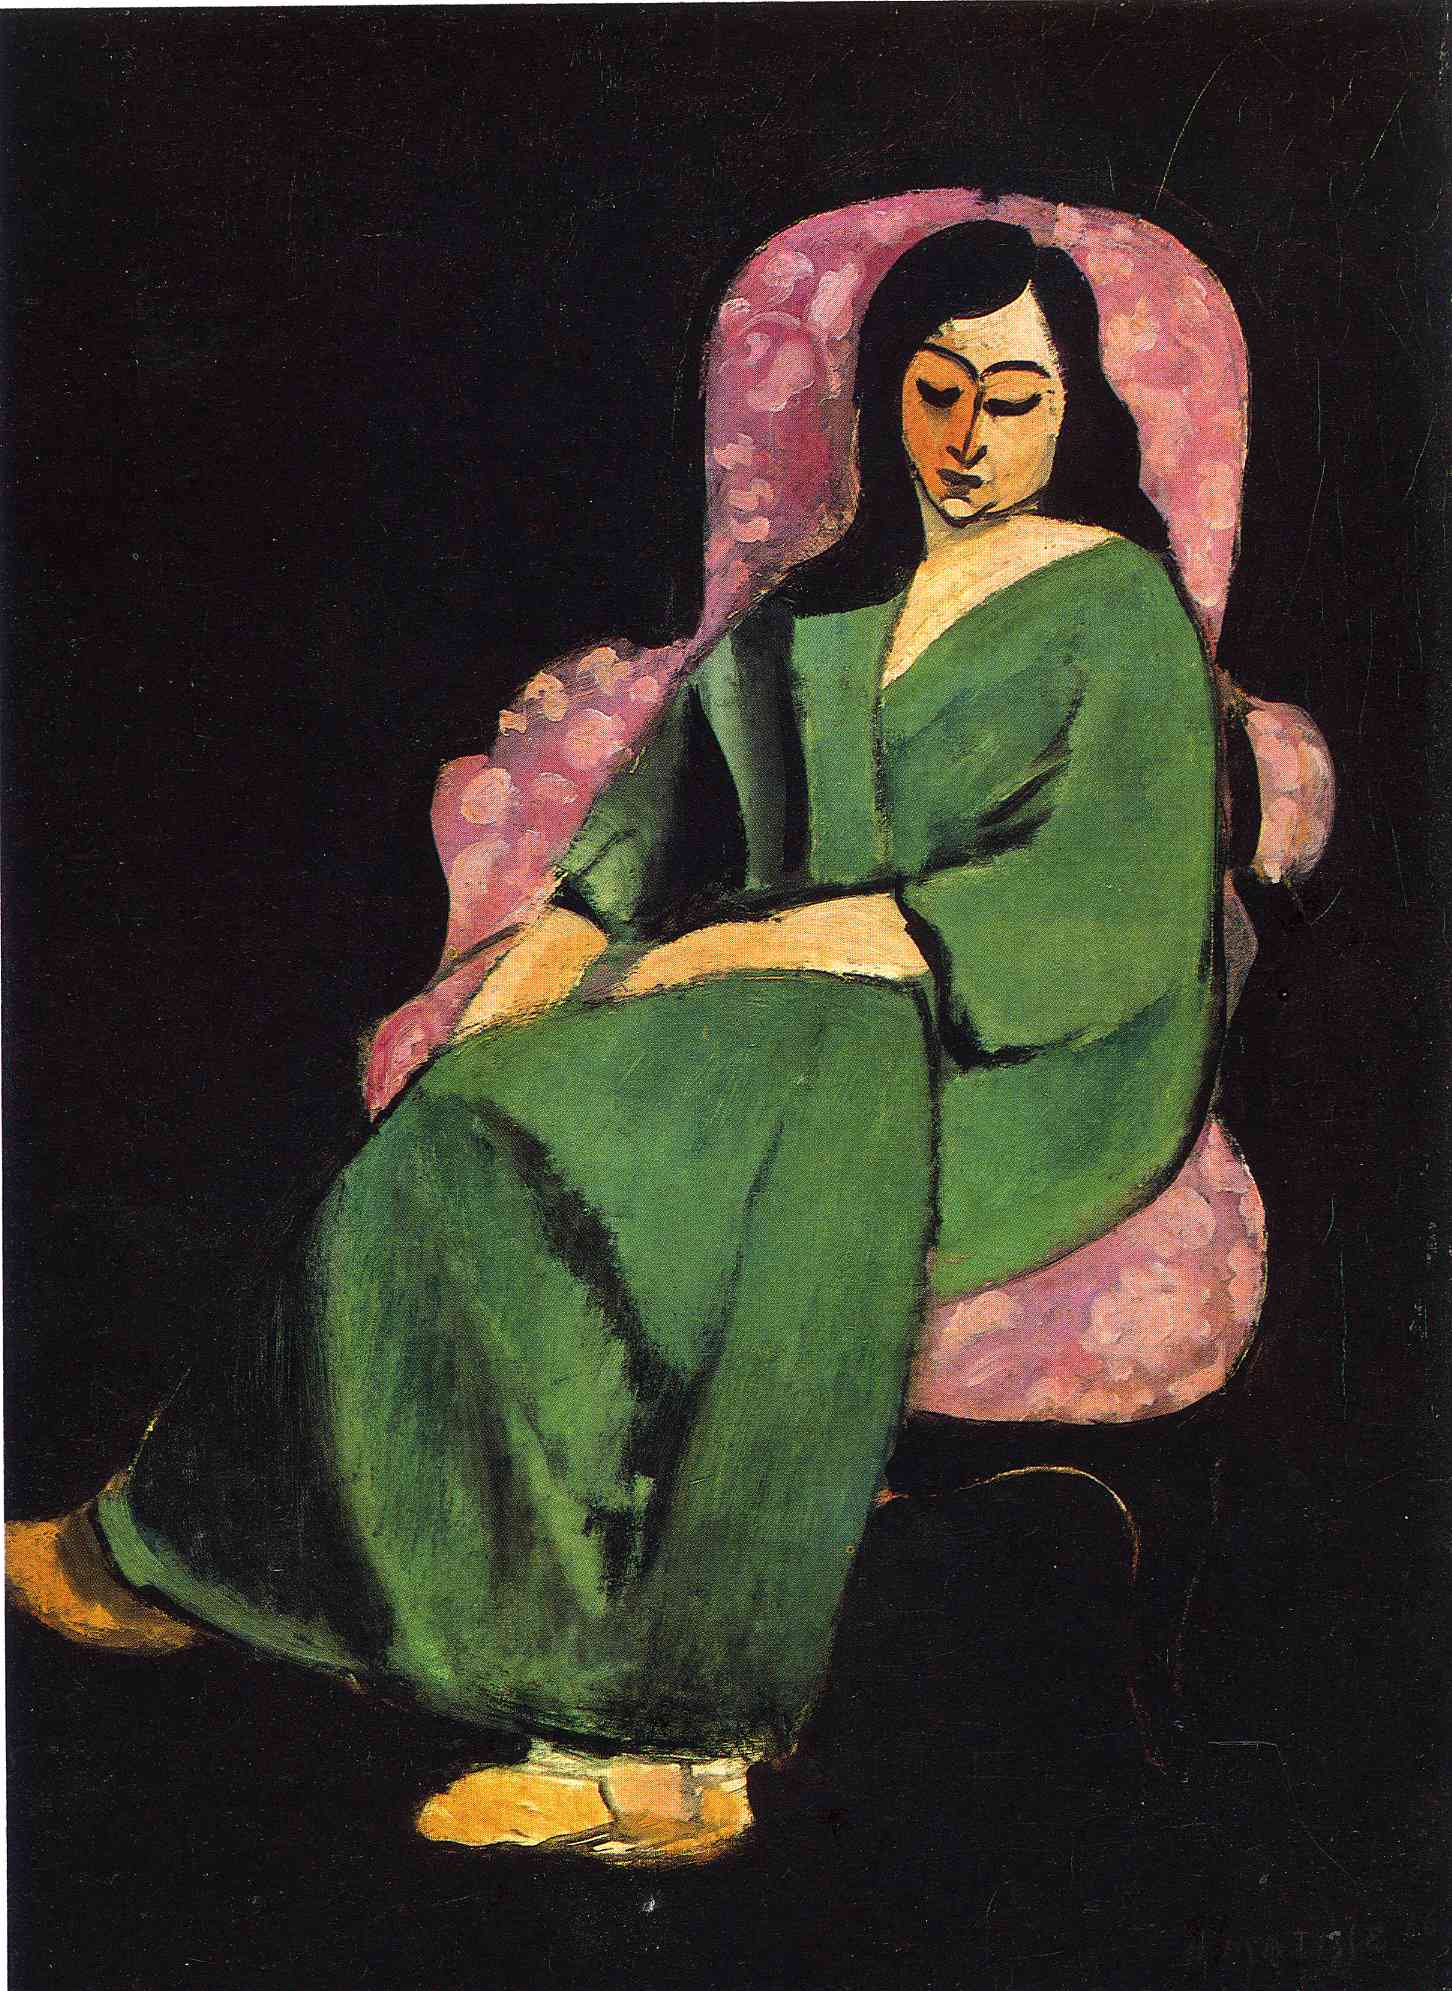 Lorette in a Green Robe against a Black Background (1916).